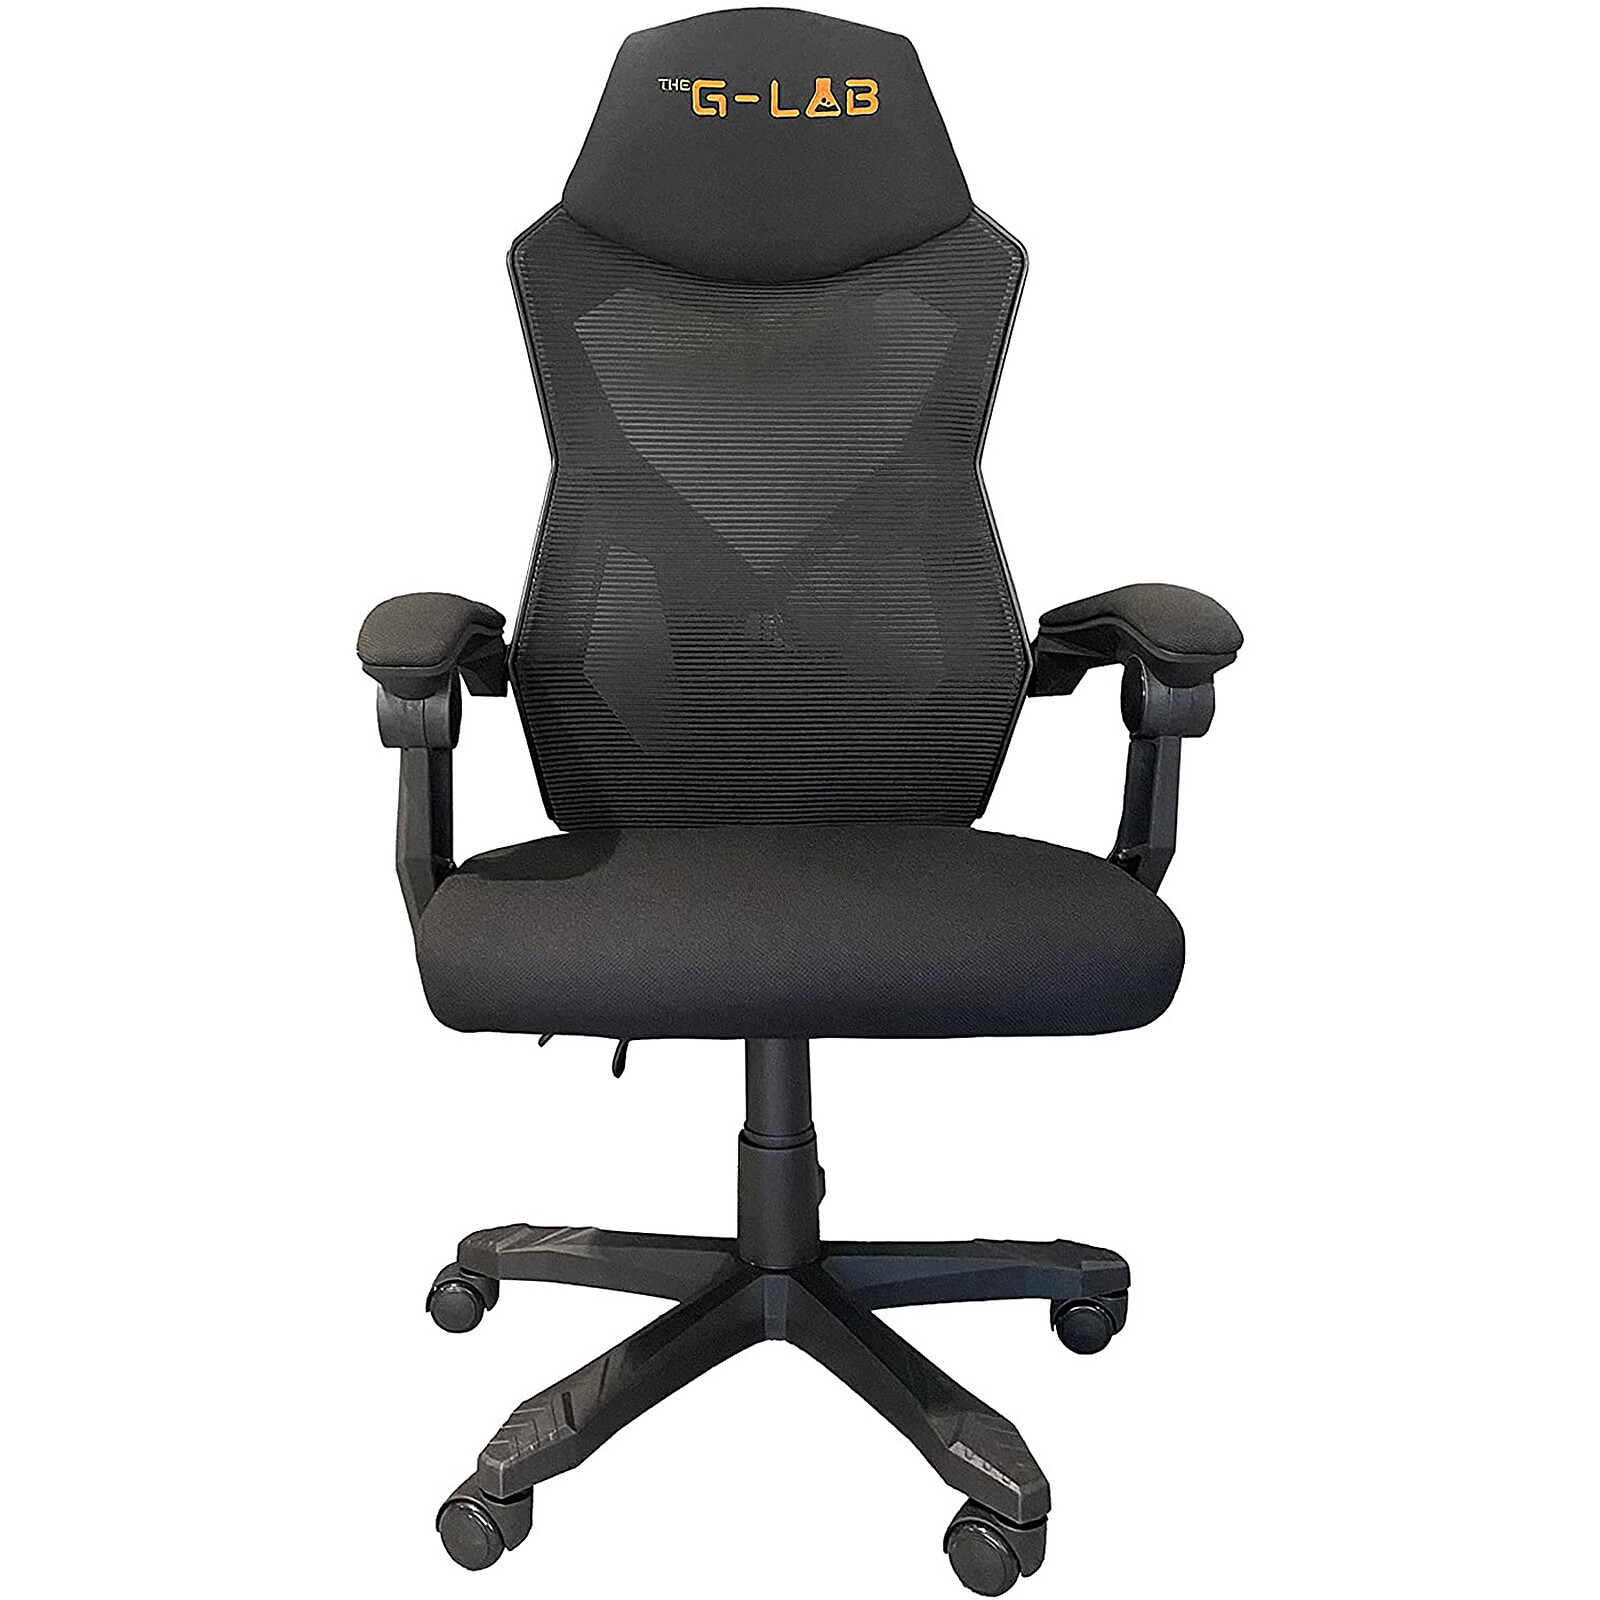 Iron Maiden - Siege gamer taille L - Fauteuil gamer - LDLC